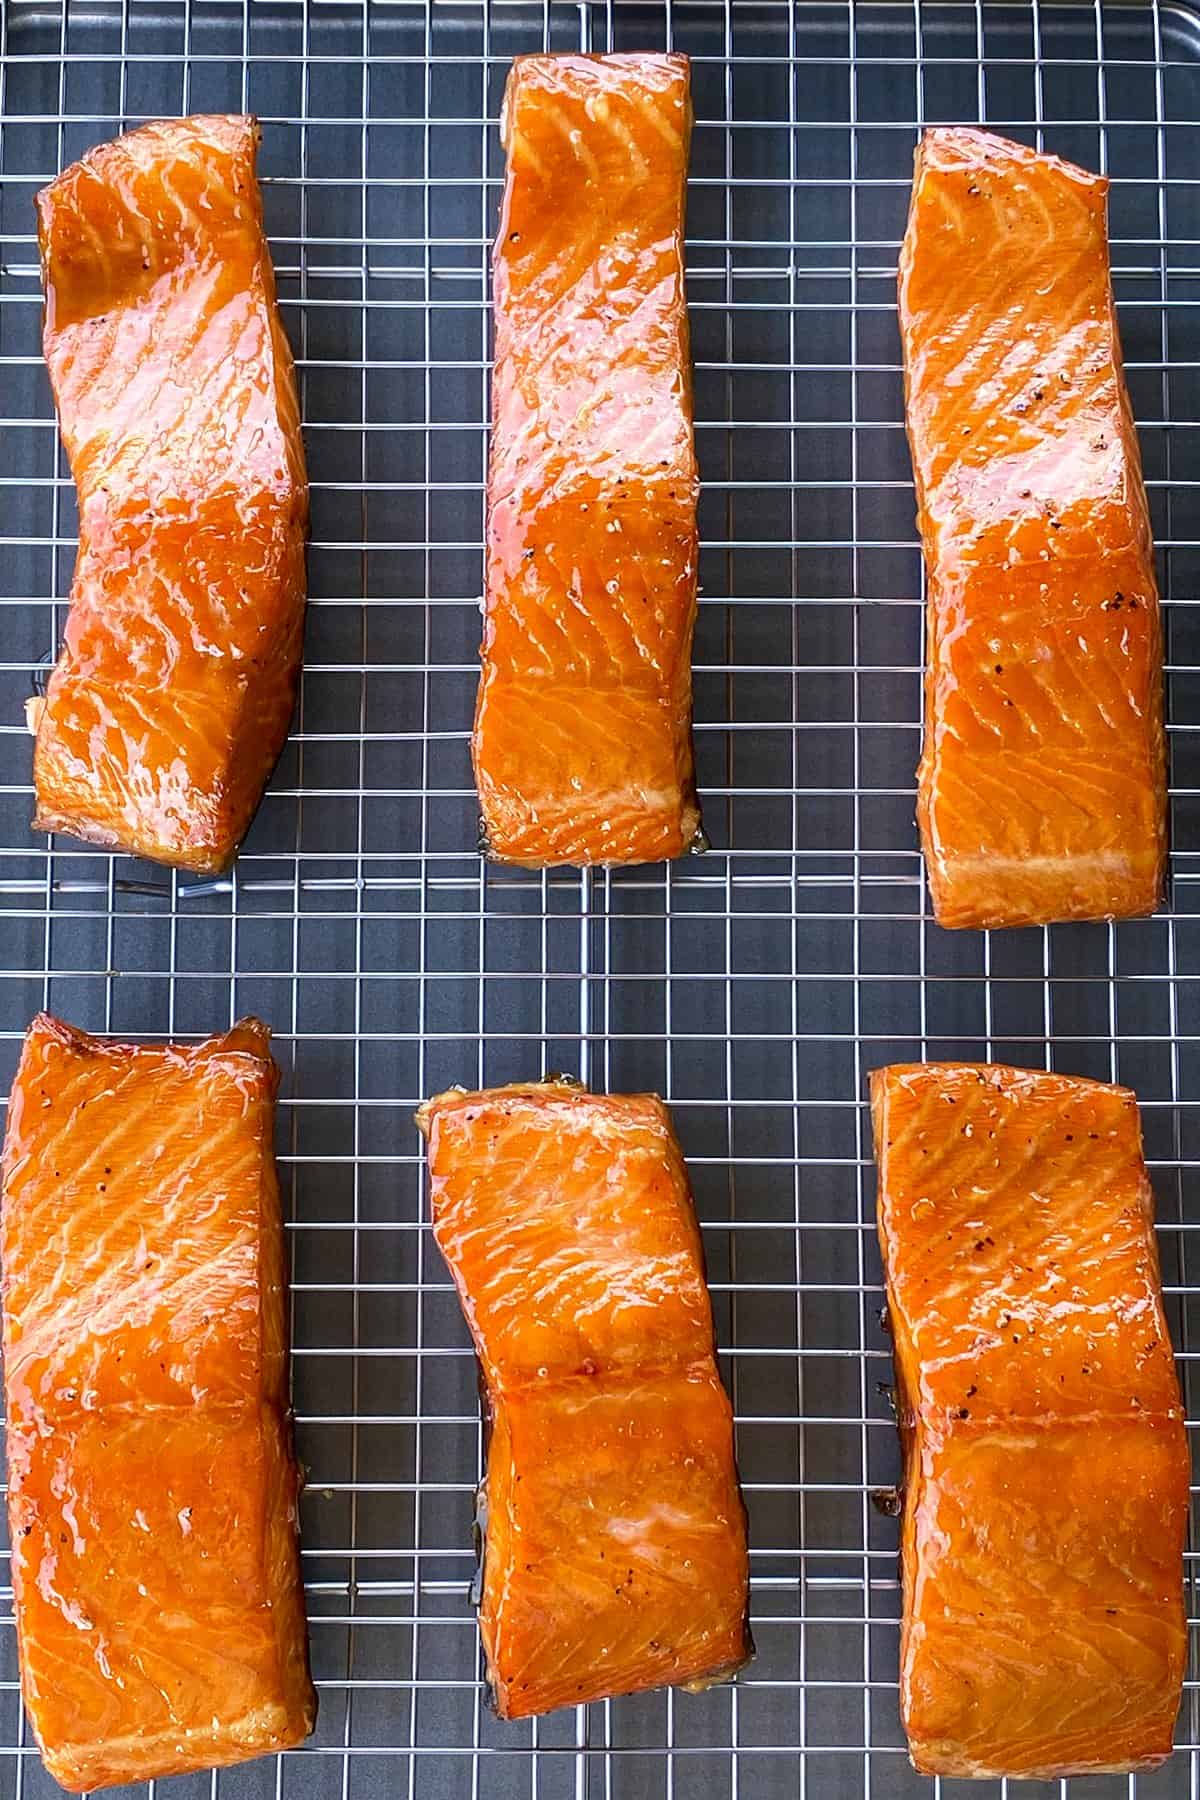 This easy step by step guide to smoked salmon recipe will show you just how to smoke salmon at home using fish you bought at grocery stores or caught yourself. Not only is the recipe 